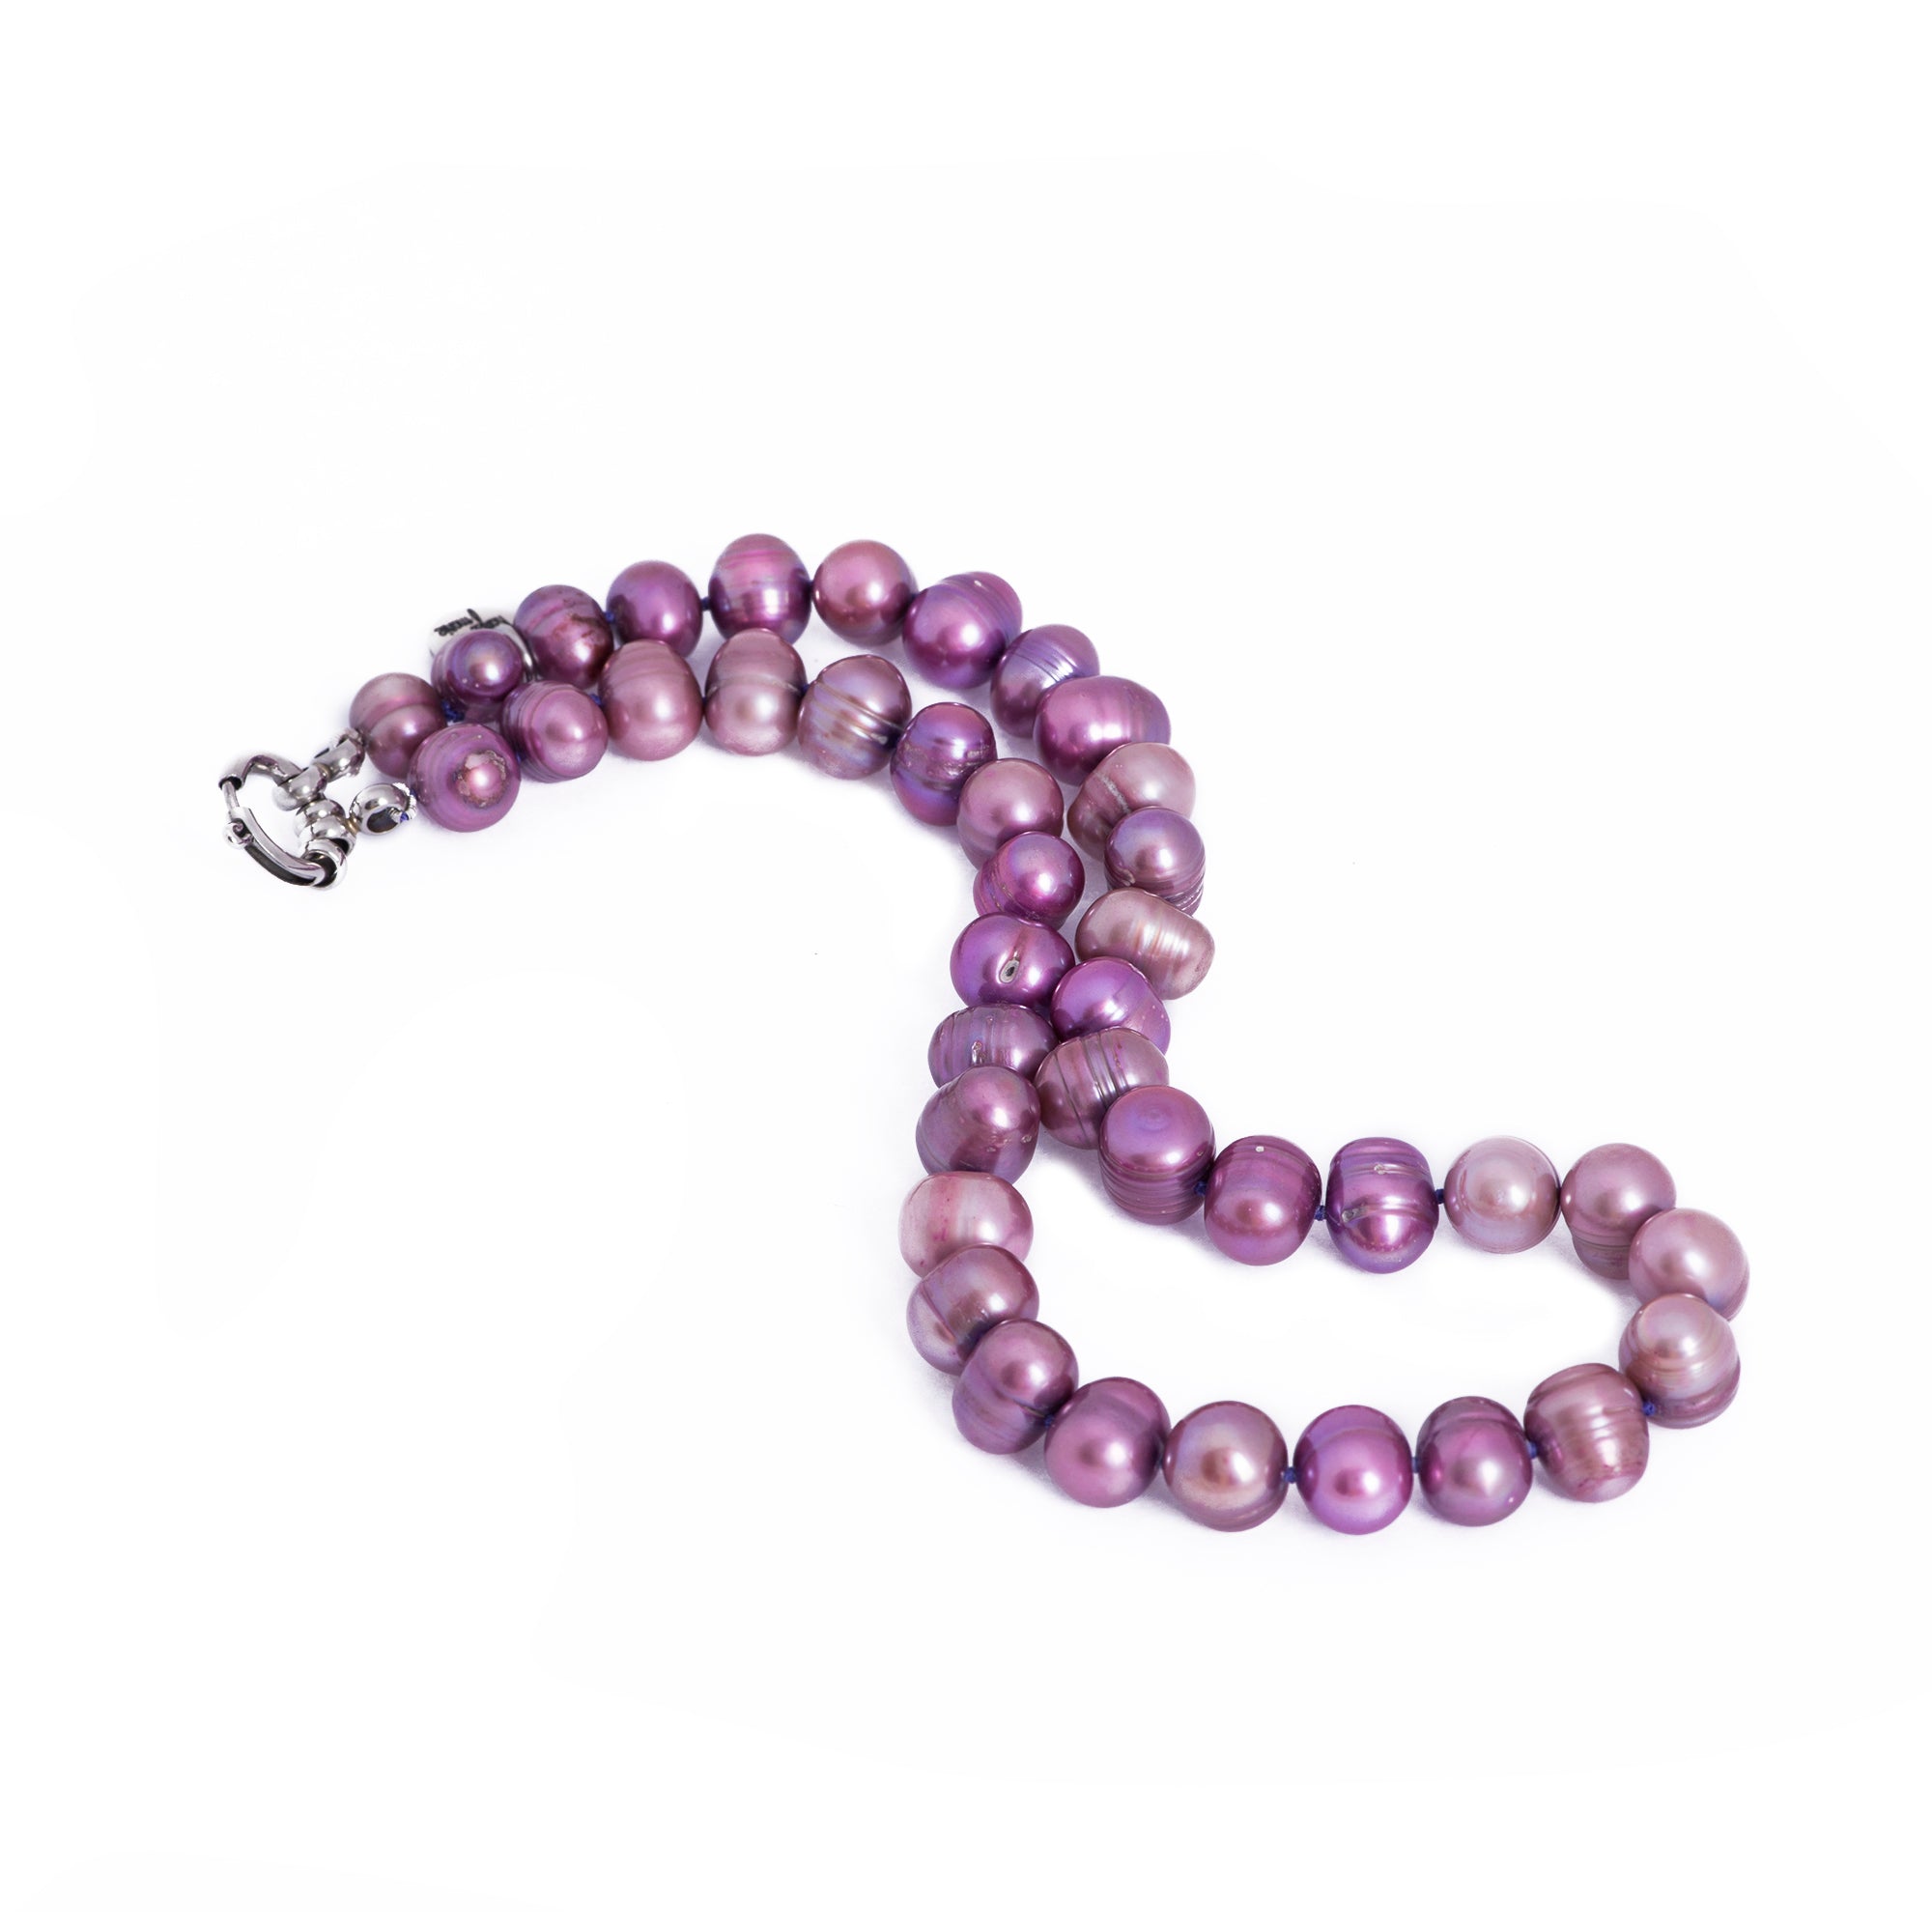 Lavender Khaki Nugget Pearl Necklace - Jewelry By Gail, Inc.